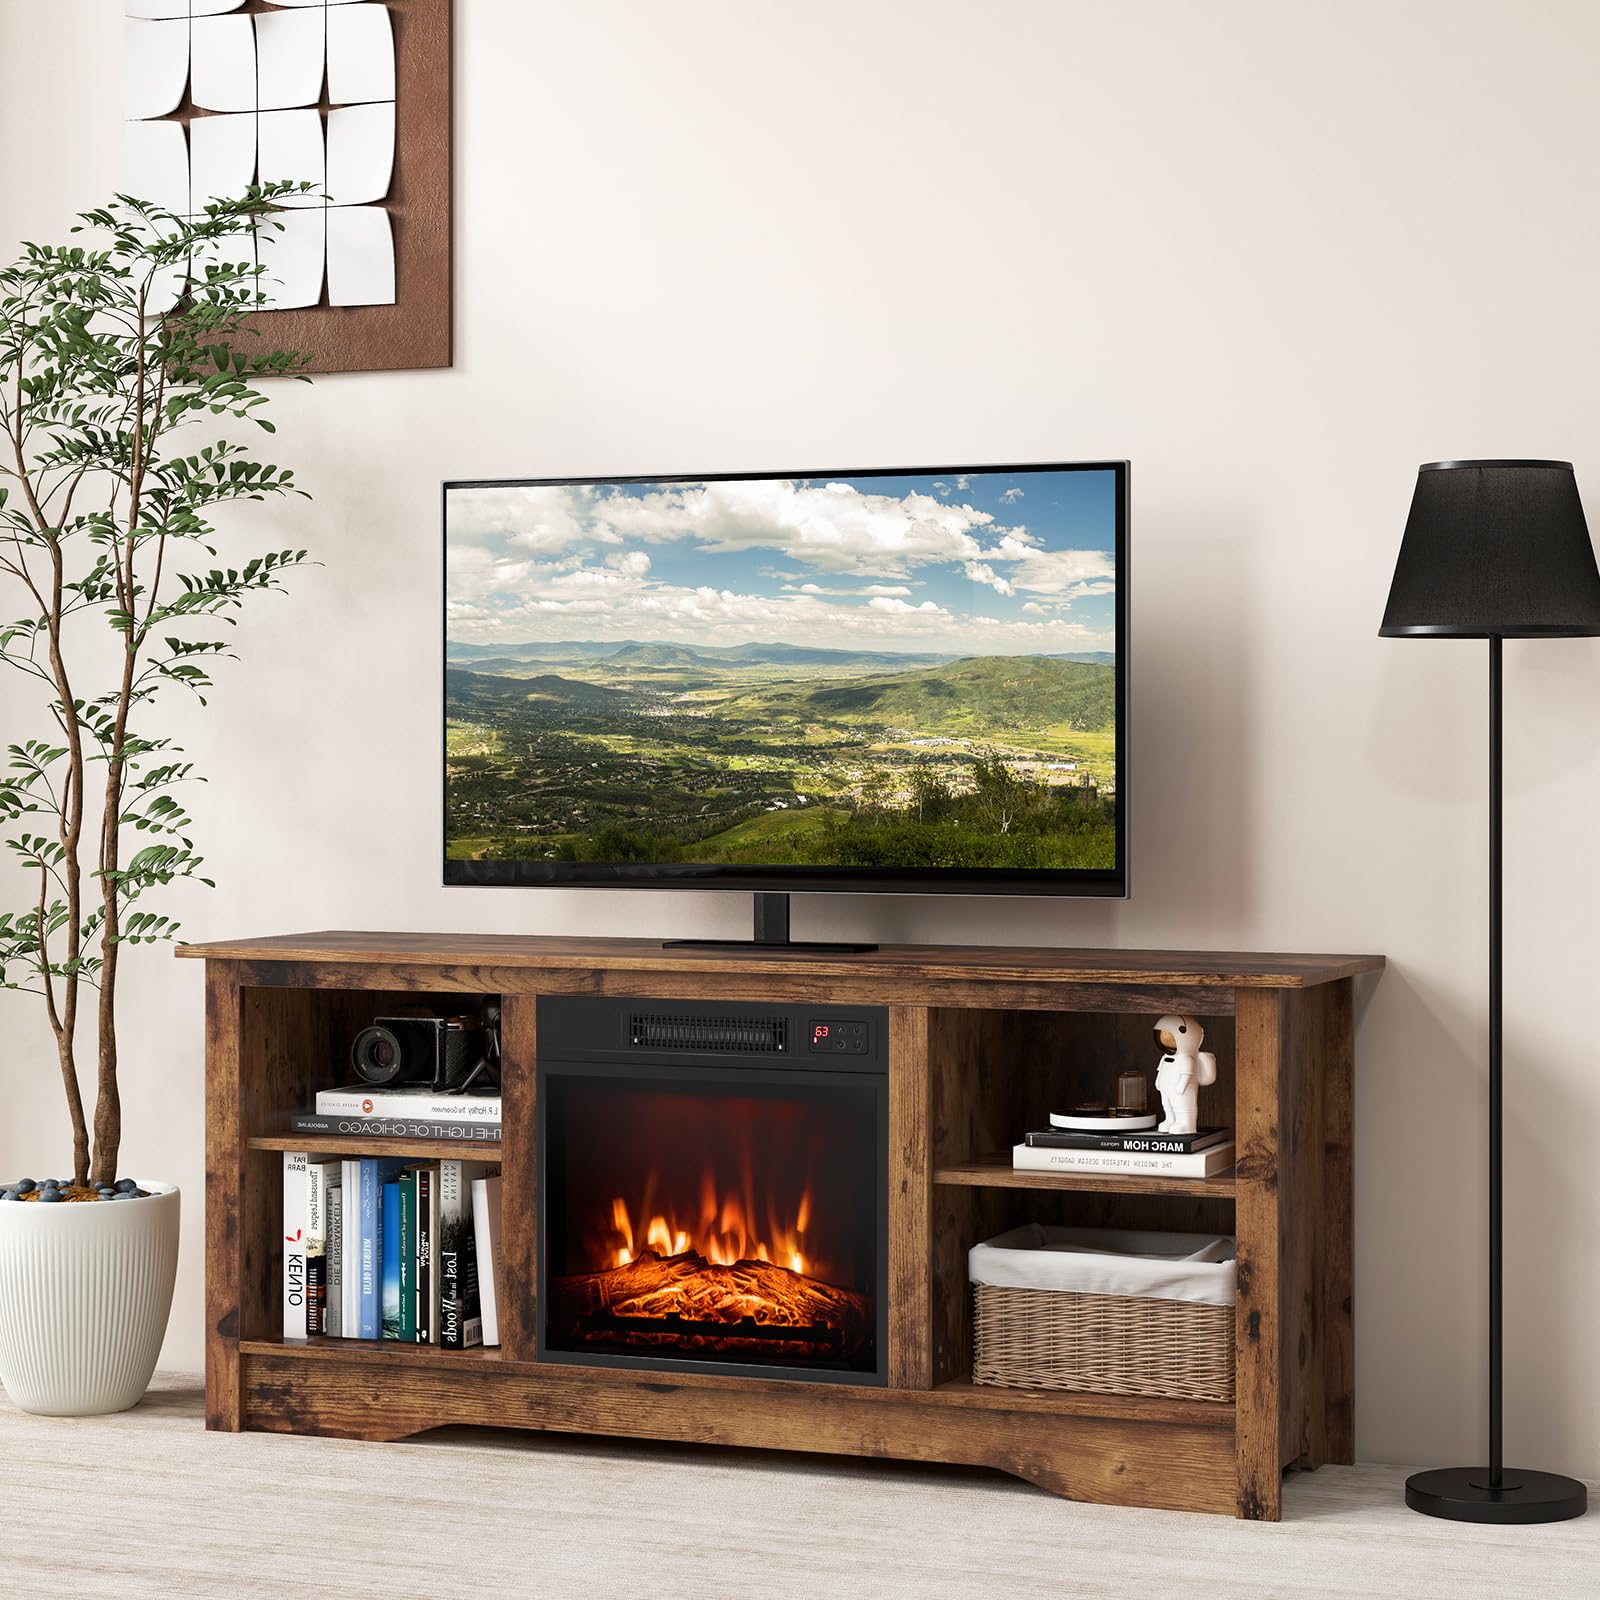 Giantex TV Stand with Fireplace - TV Cabinet with Adjustable Shelves